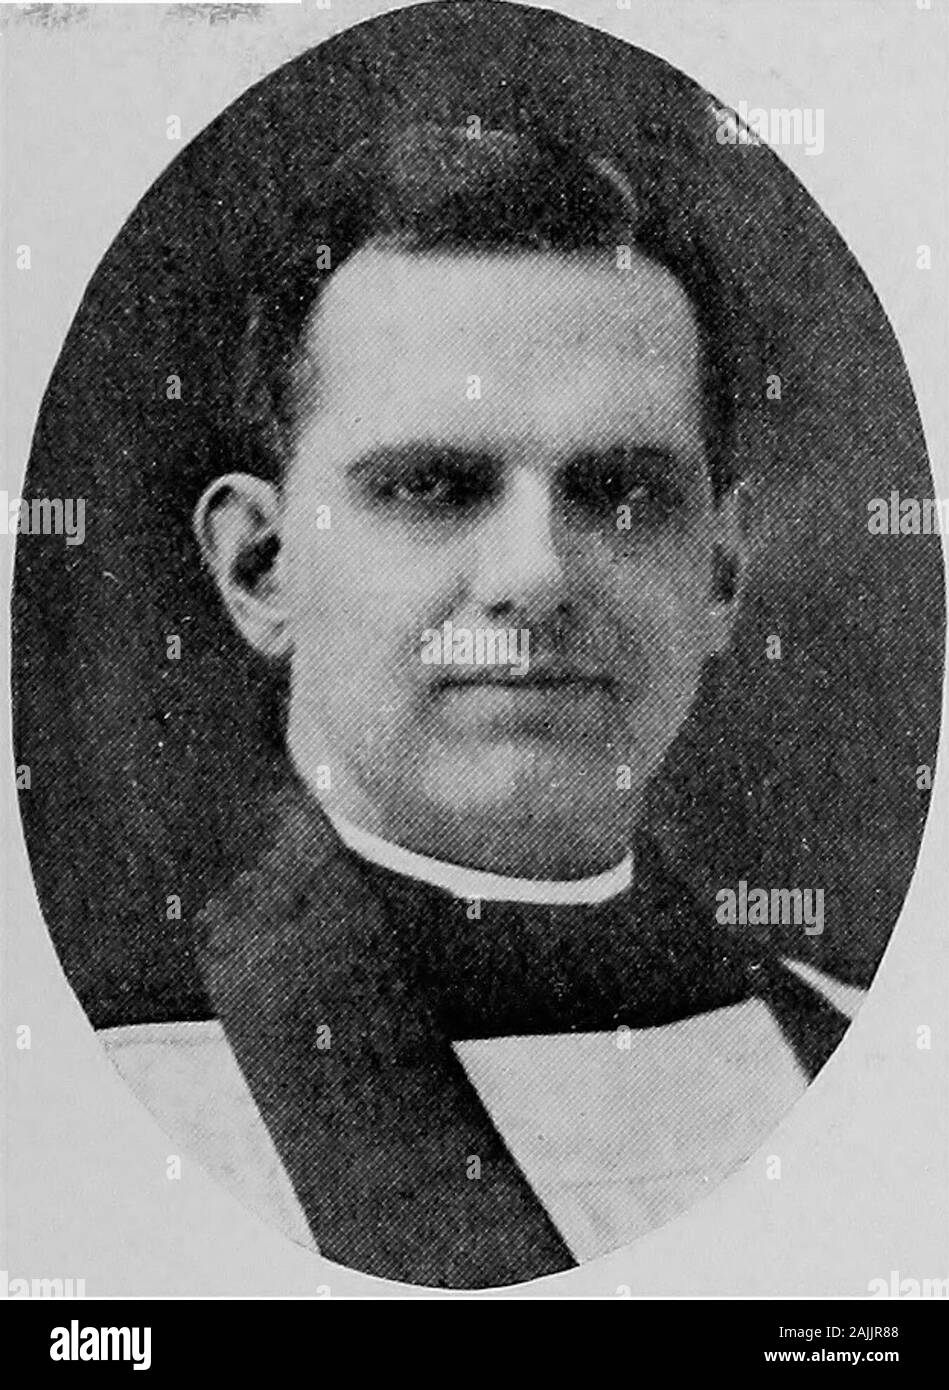 Empire state notables, 1914 . REV. WILLIAM J. McCLURE Rector of the ChurcH of the Immaculate Conception of the Blessed Virgin Mary Stapleton, S. I., N. Y. REV. JOS. HENRY ROCKWELL, S. J. President College of St. Francis Xavier New Yorl; City. Stock Photo